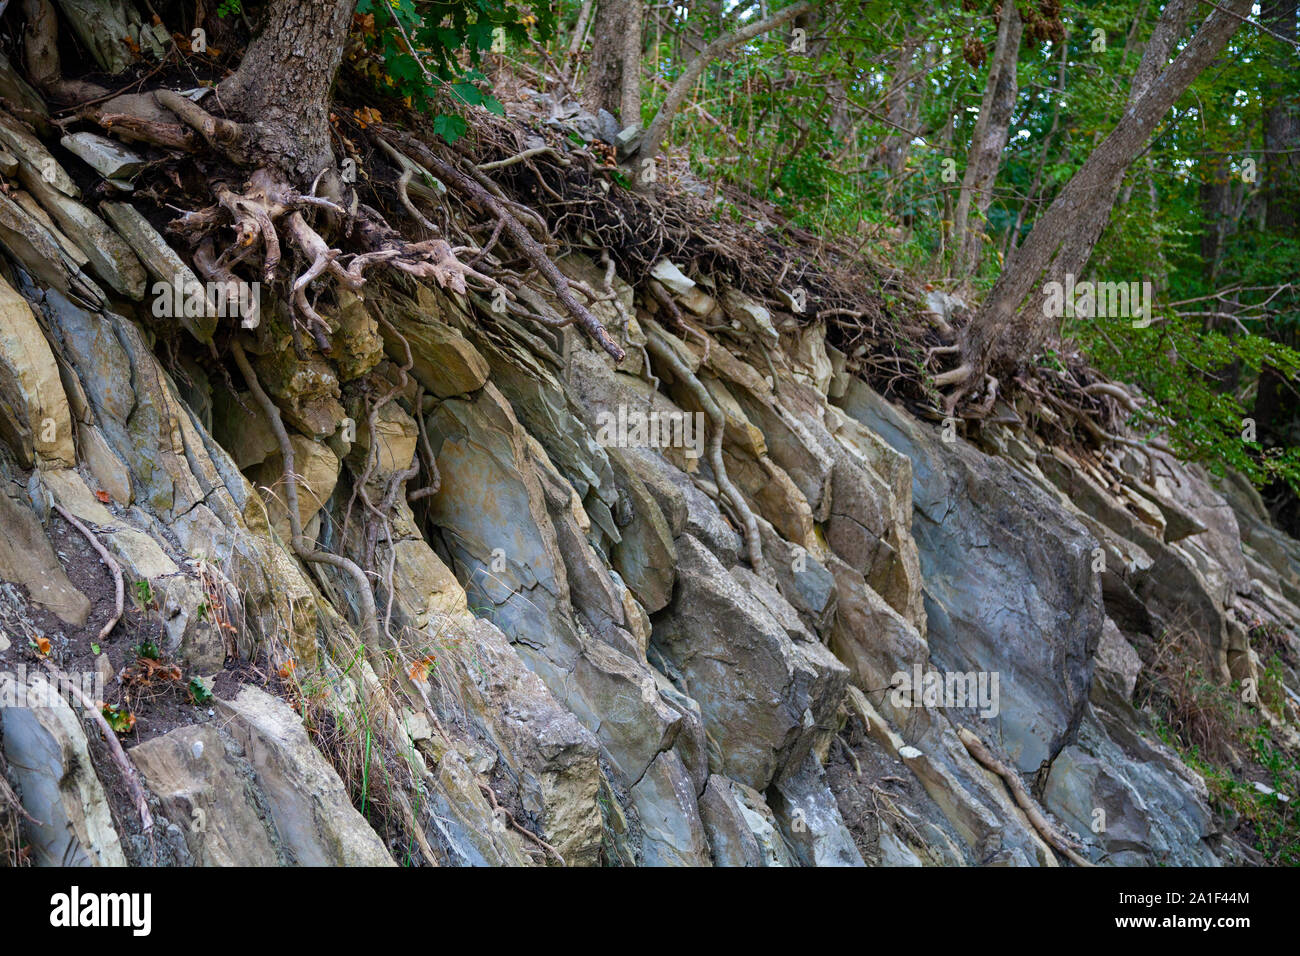 Forest in the mountains. Fragment of rocks and trees. Stock Photo